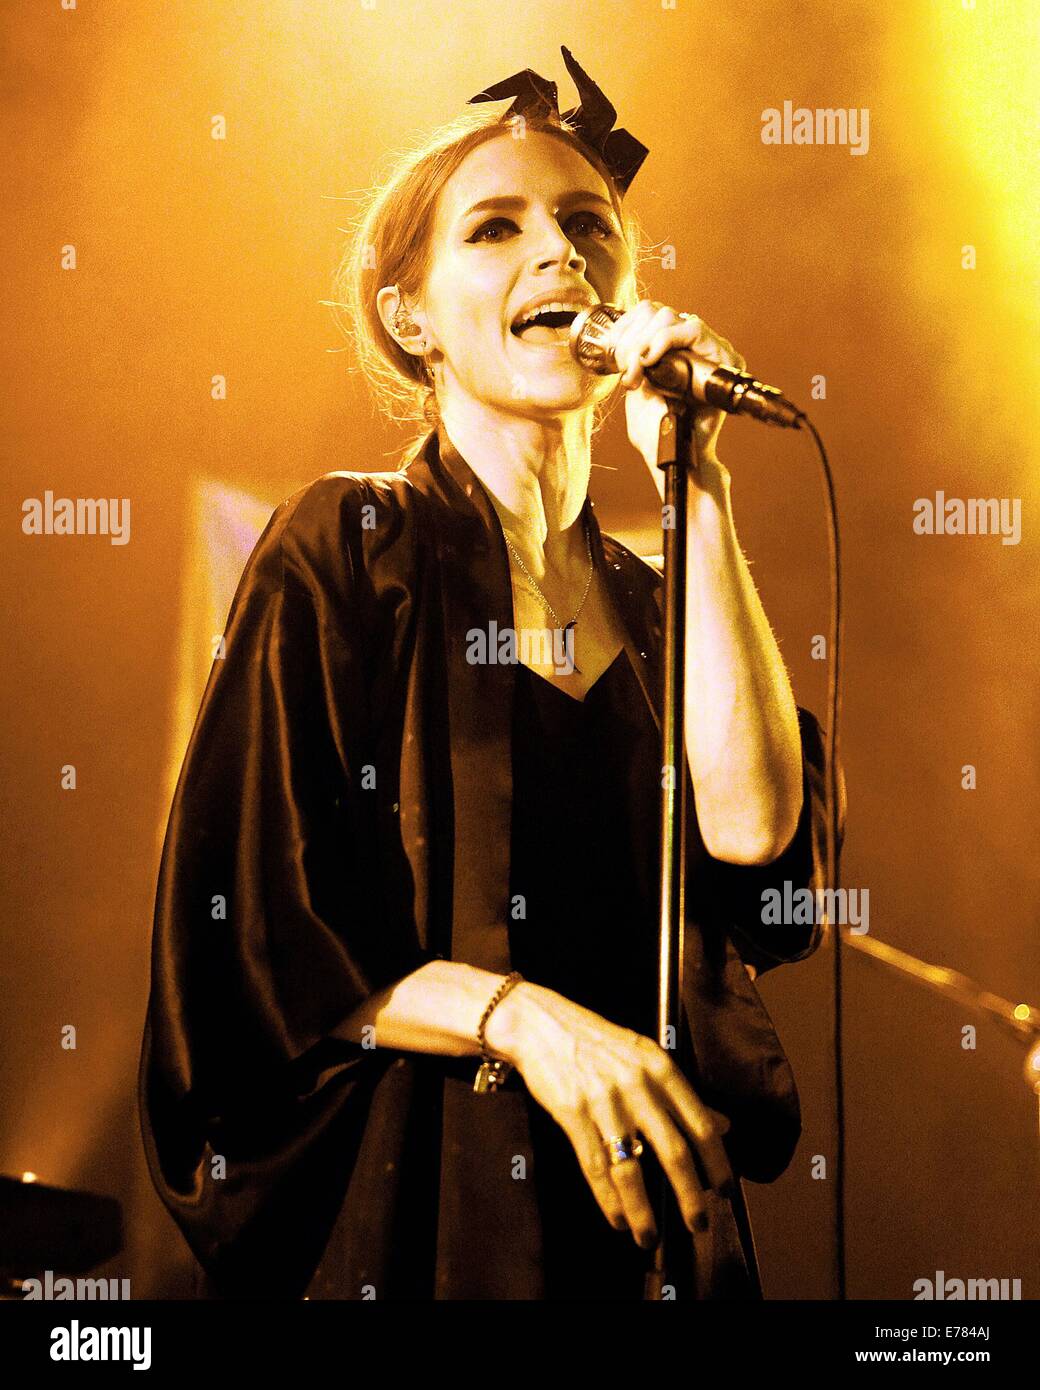 Swedish Singer Nina Persson Formerly Of The Cardigans Performs A Stock Photo Alamy